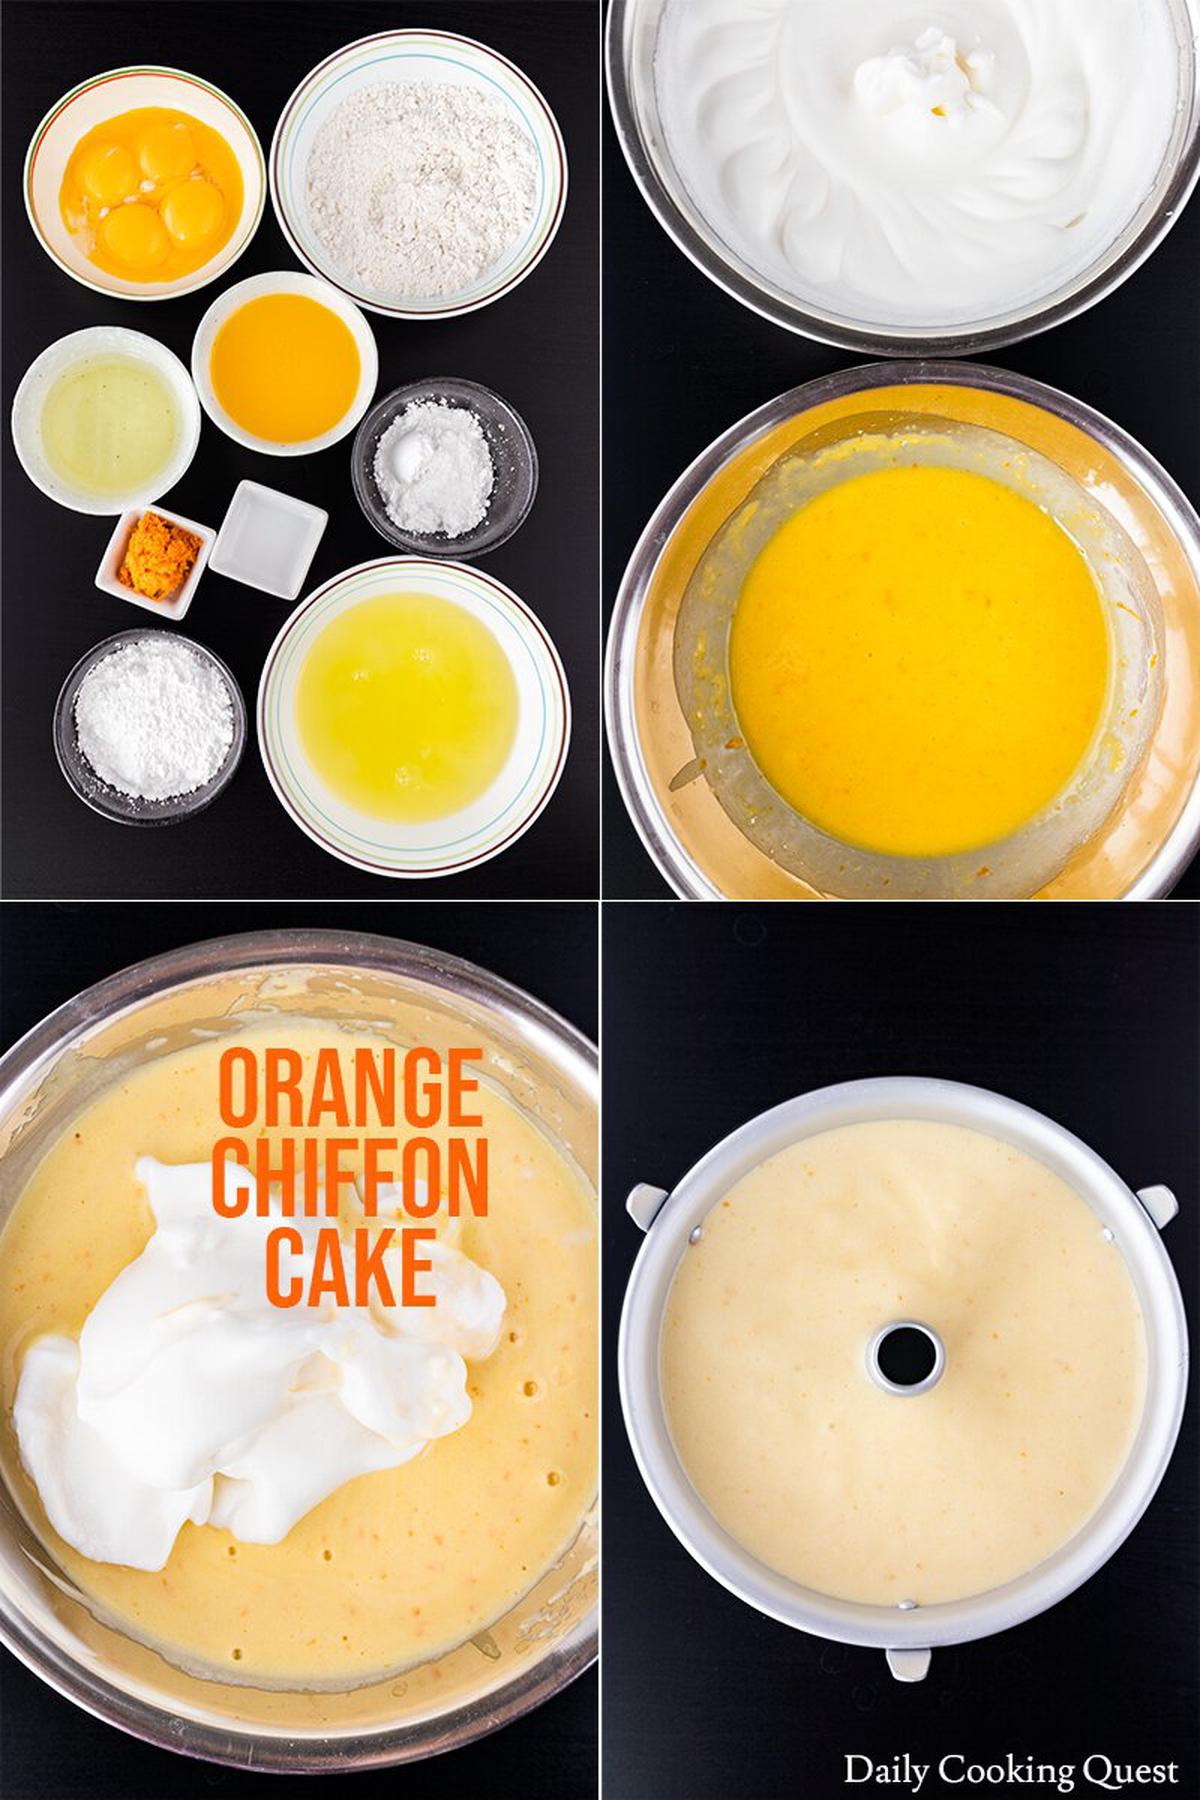 Orange Chiffon Cake - the ingredients and how to prepare the batter